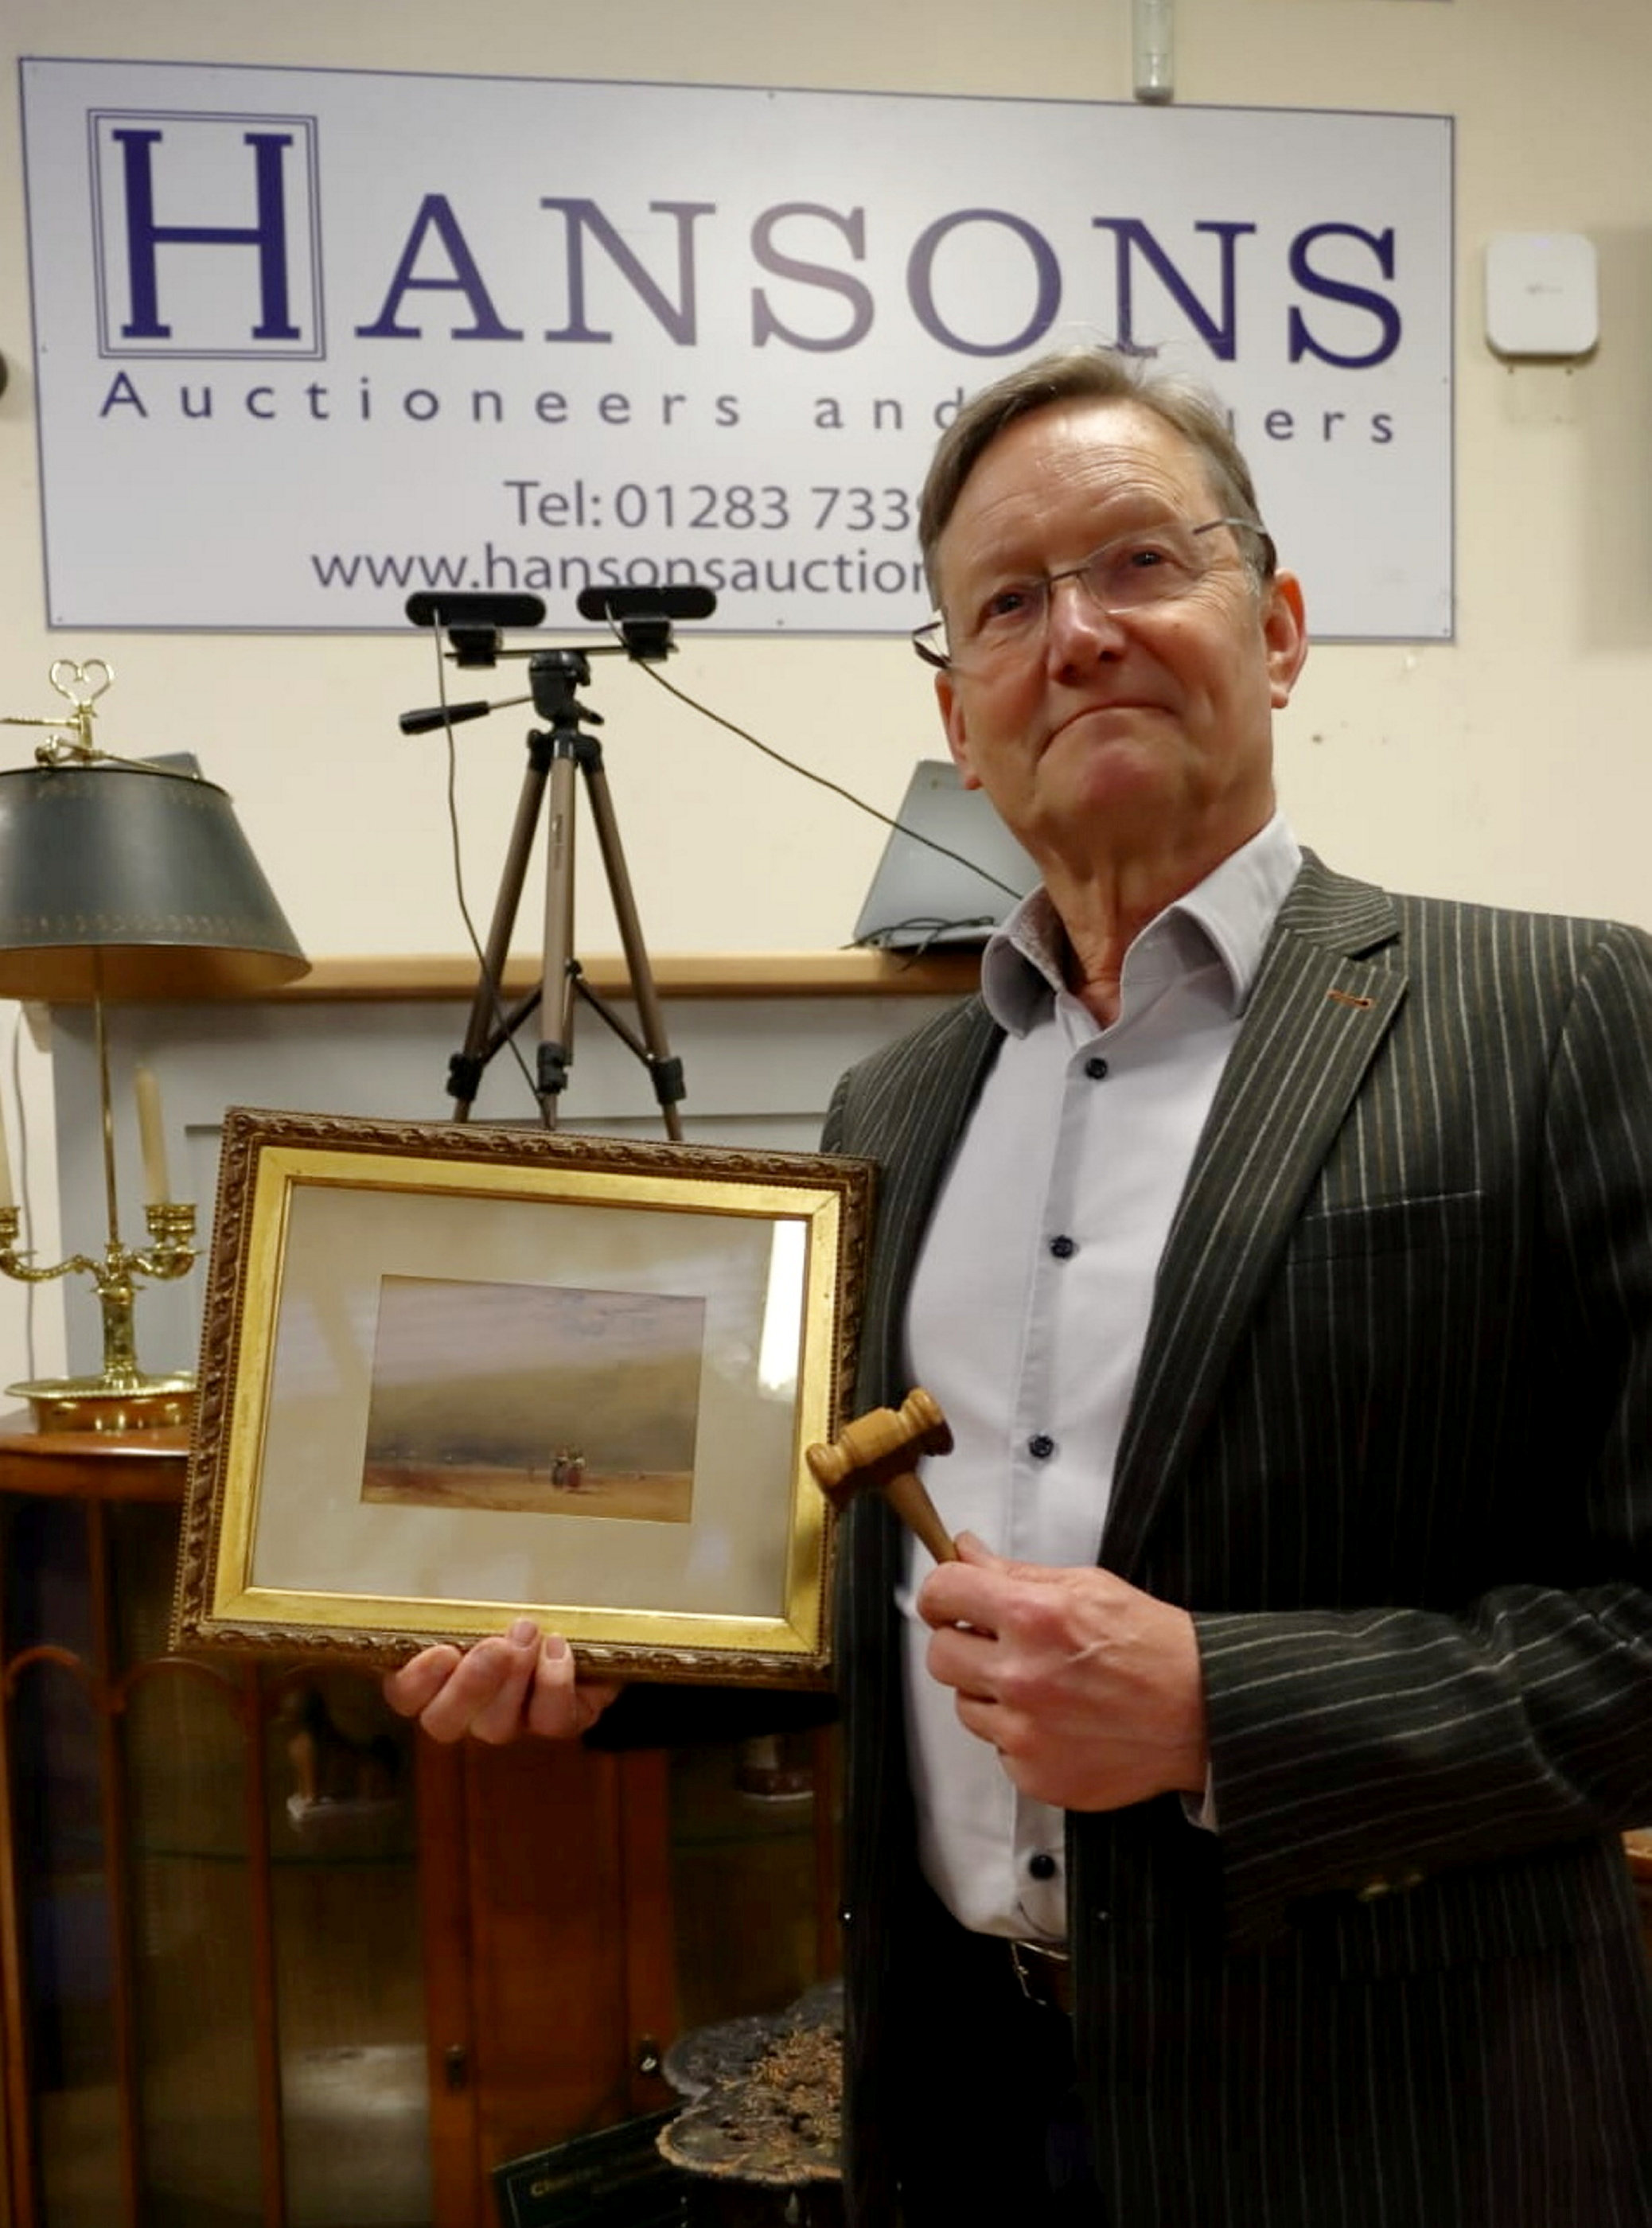 Auctioneer Adrian Kinton with the David Cox watercolour which sold for £18,000